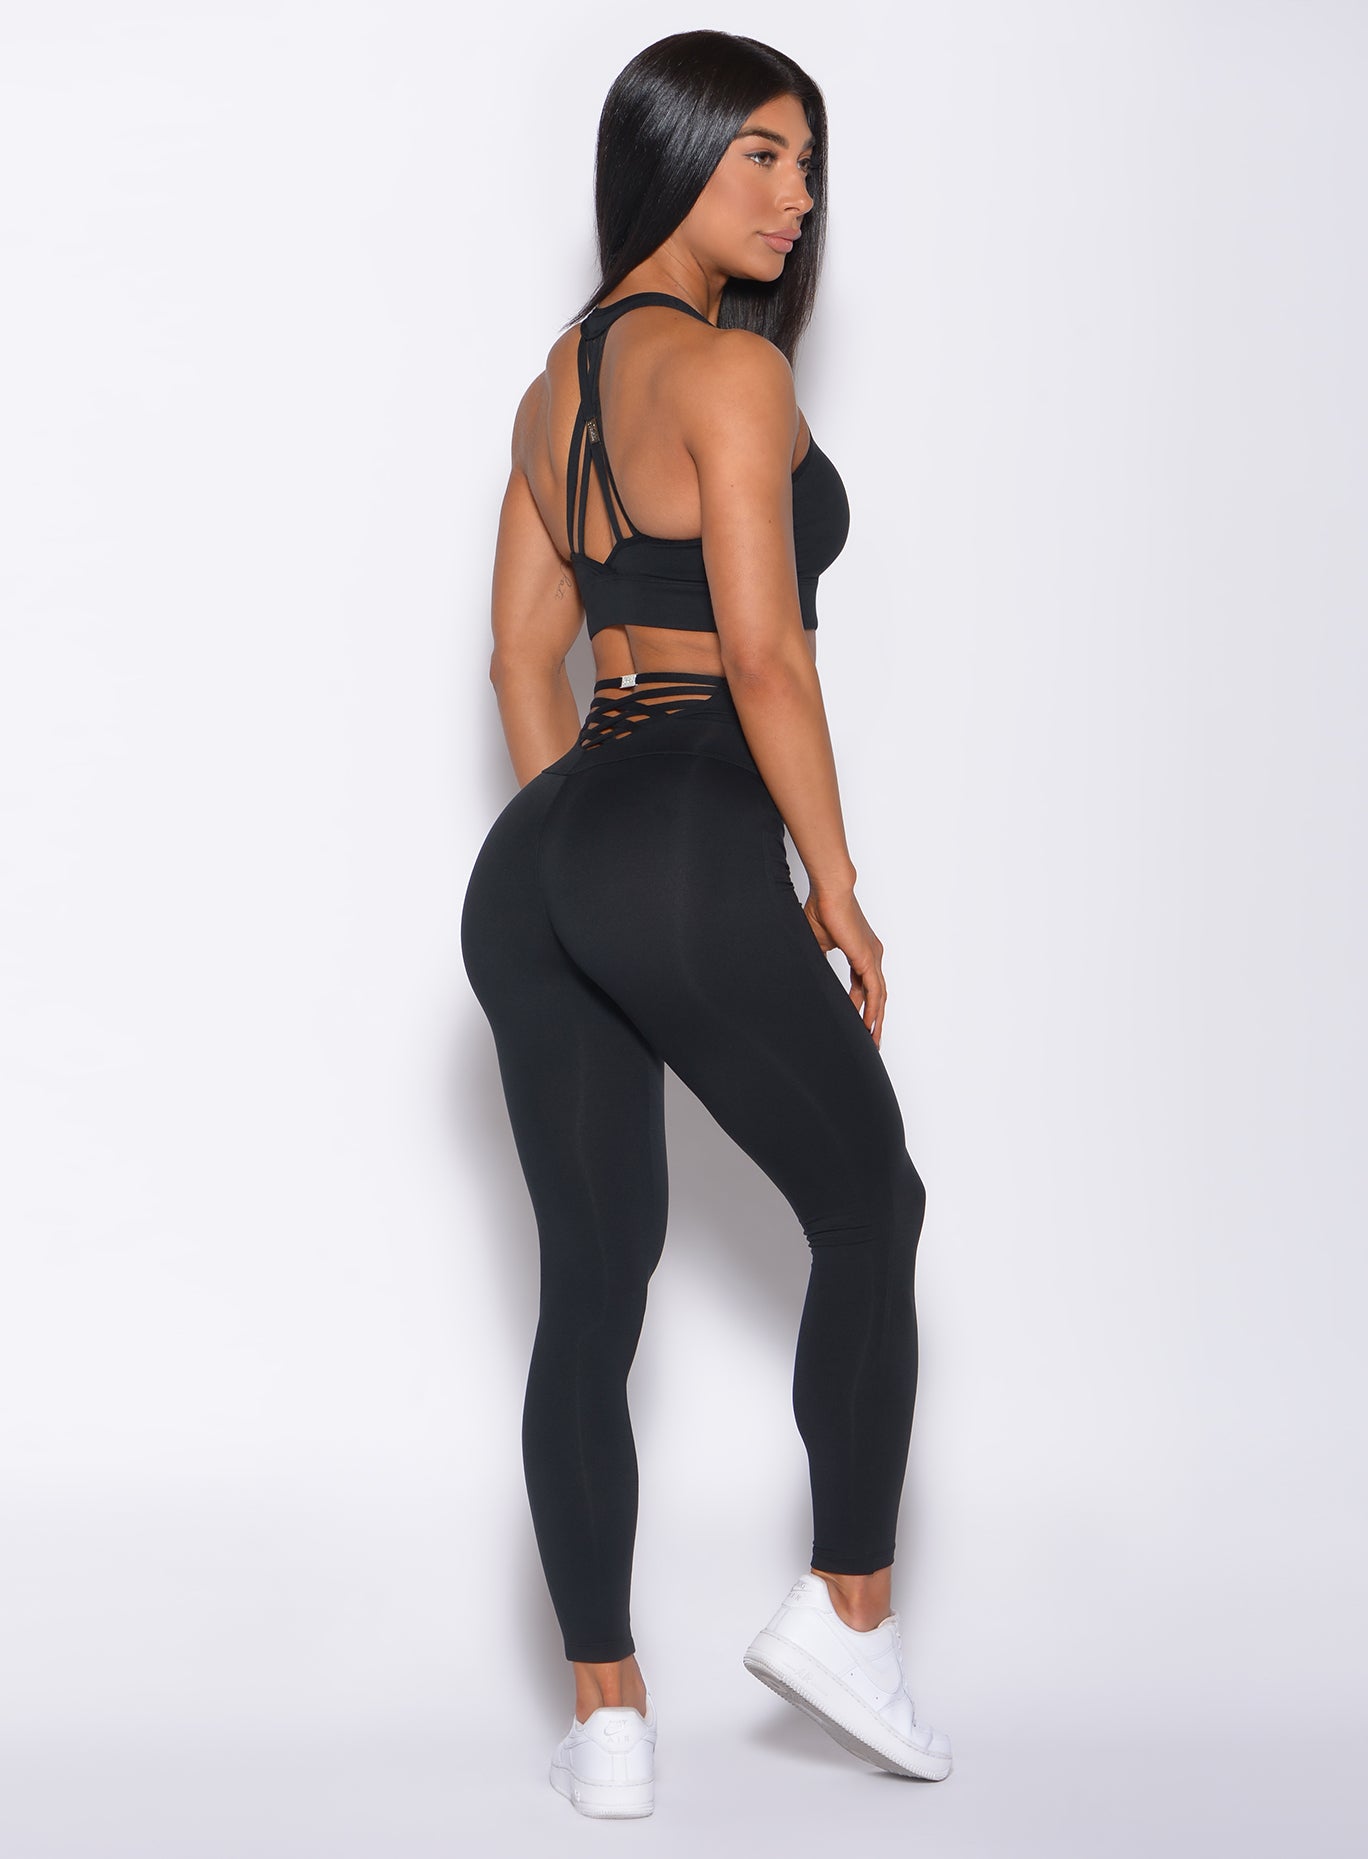 Right side profile view of a model in our black sexy back leggings and a matching sports bra 